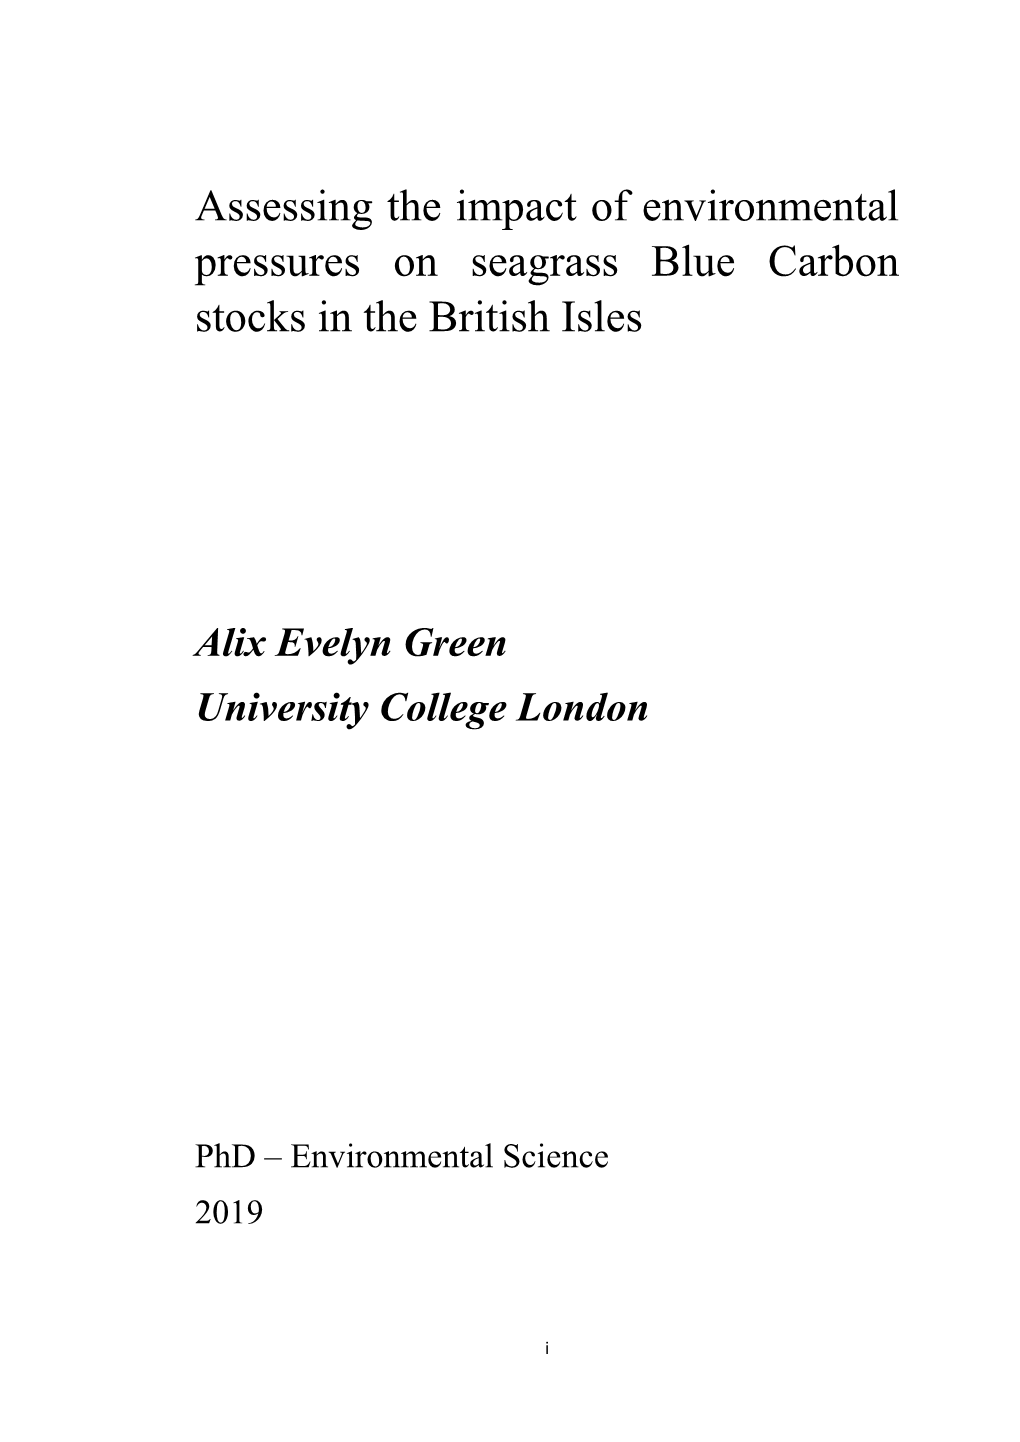 Assessing the Impact of Environmental Pressures on Seagrass Blue Carbon Stocks in the British Isles